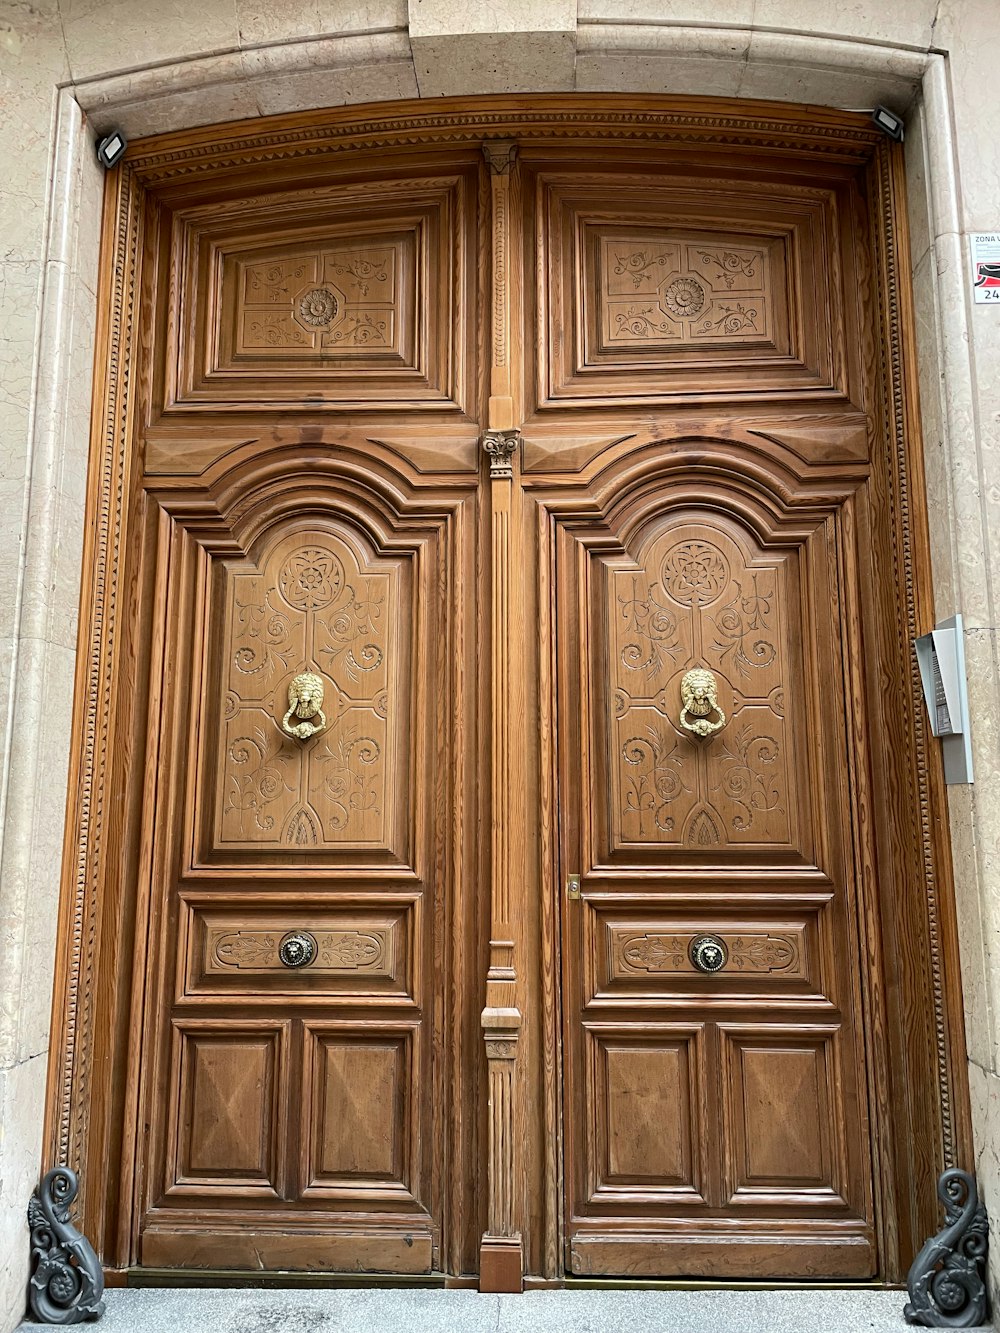 a large wooden door with ornate carvings on it